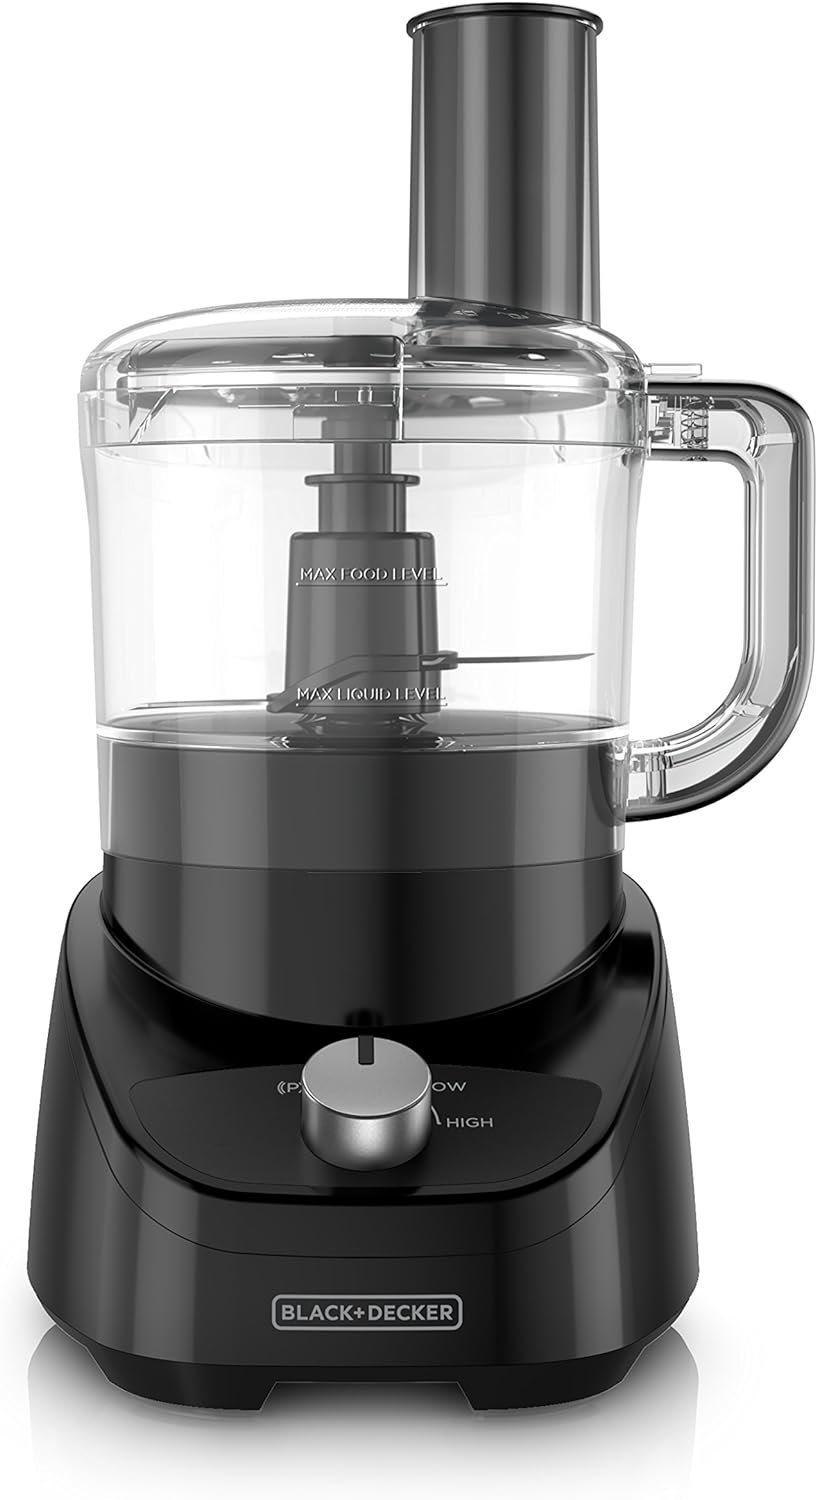 BLACK+DECKER 3-in-1 Easy Assembly 8-Cup Food Processor, Black, FP4150B